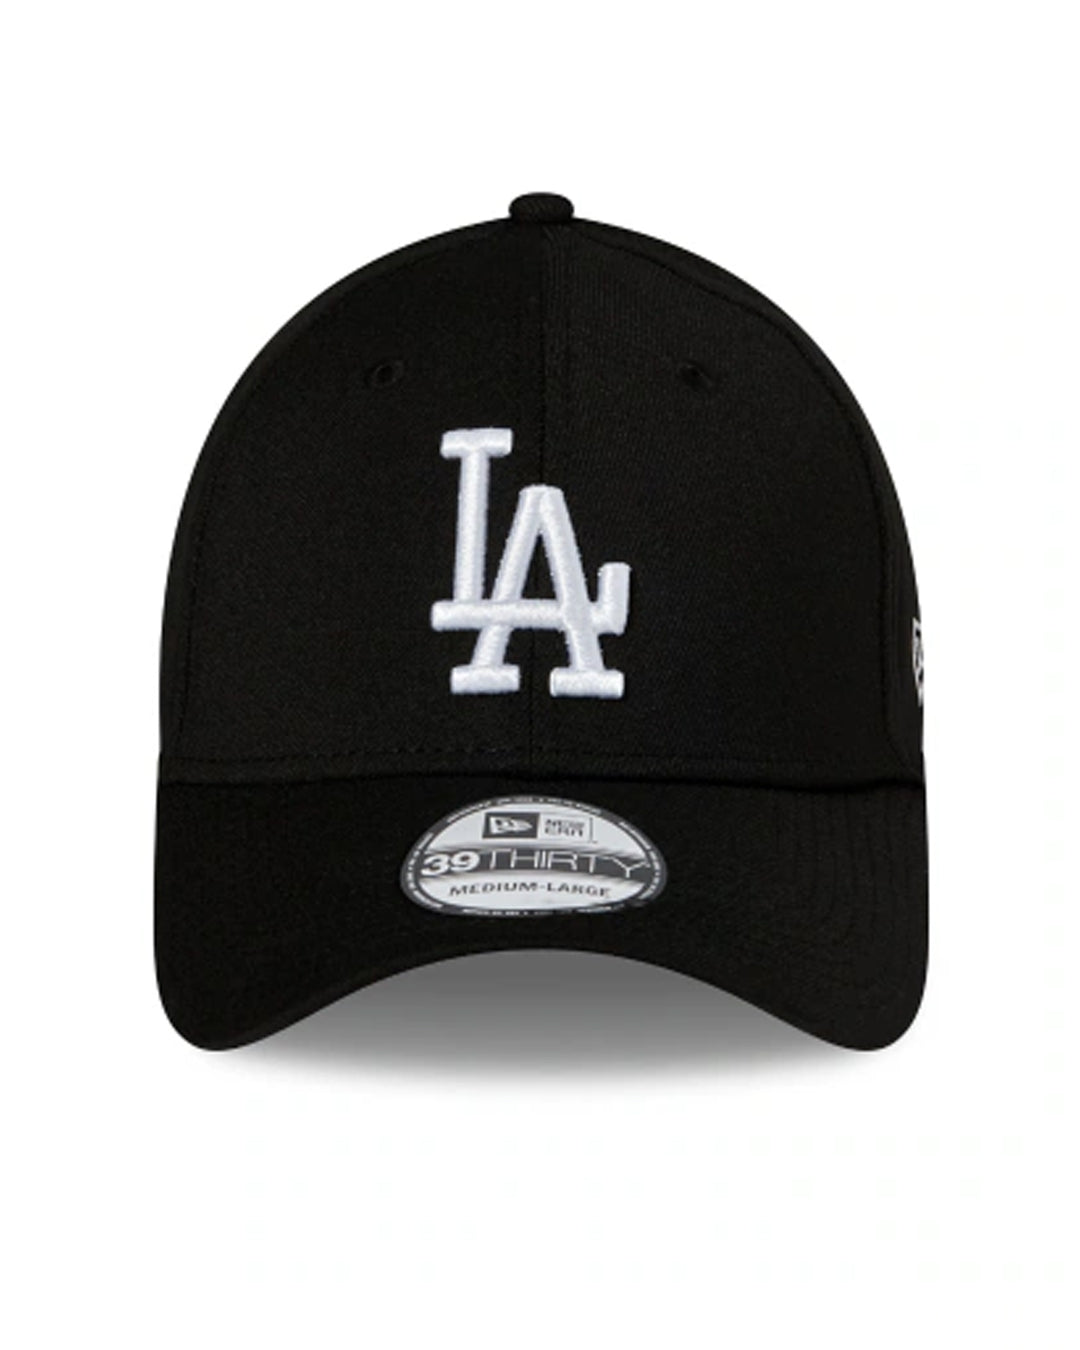 Los Angeles Dodgers 39THIRTY Stretch Fit